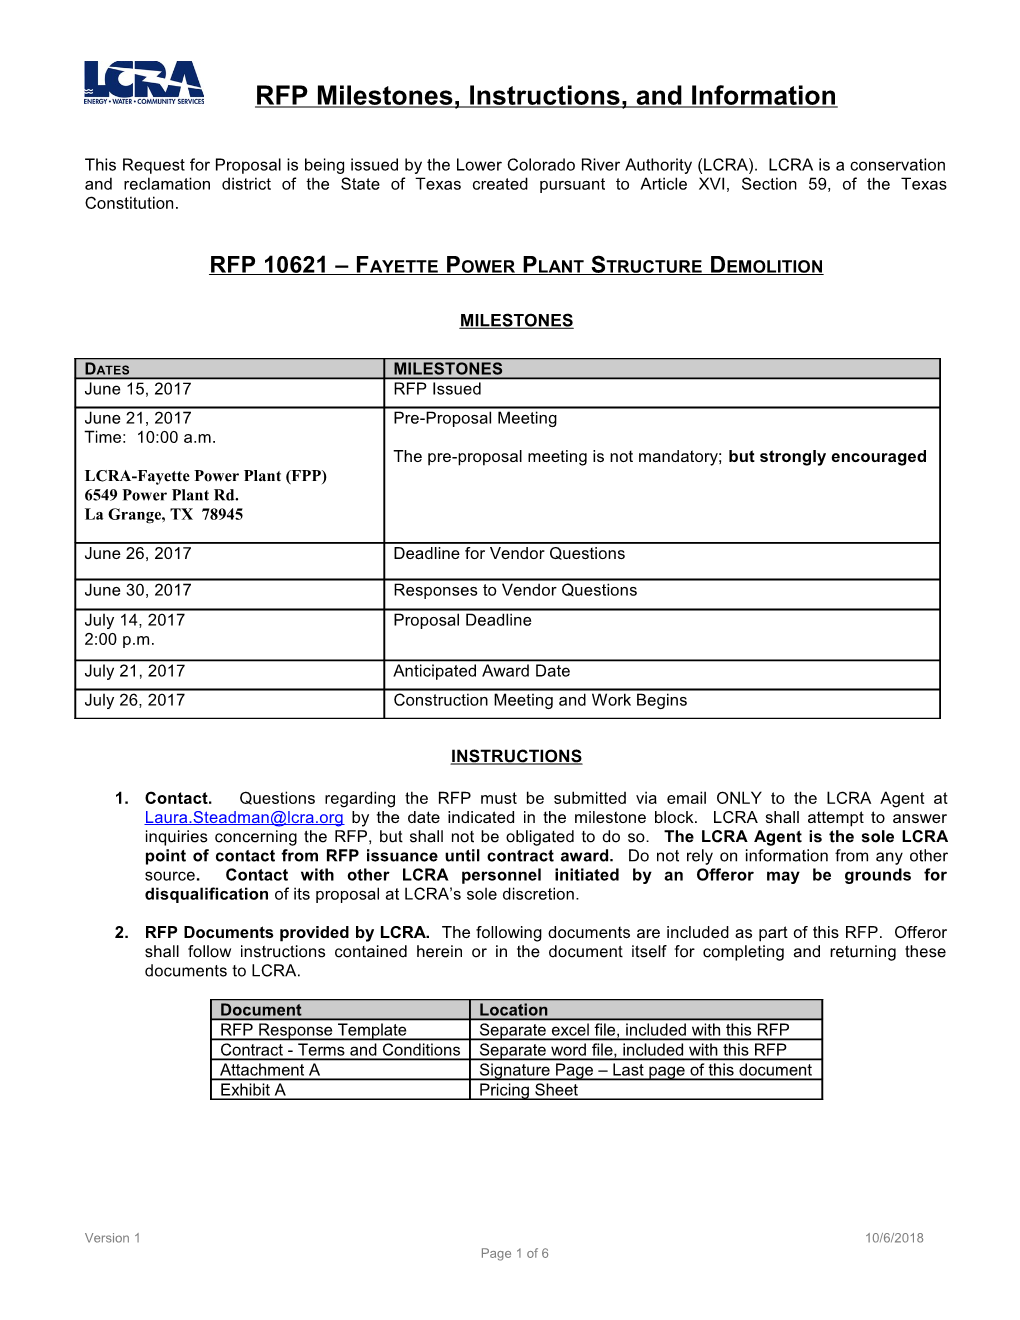 Fayette Power Plant (FPP) Structure Demo RFP Instructions